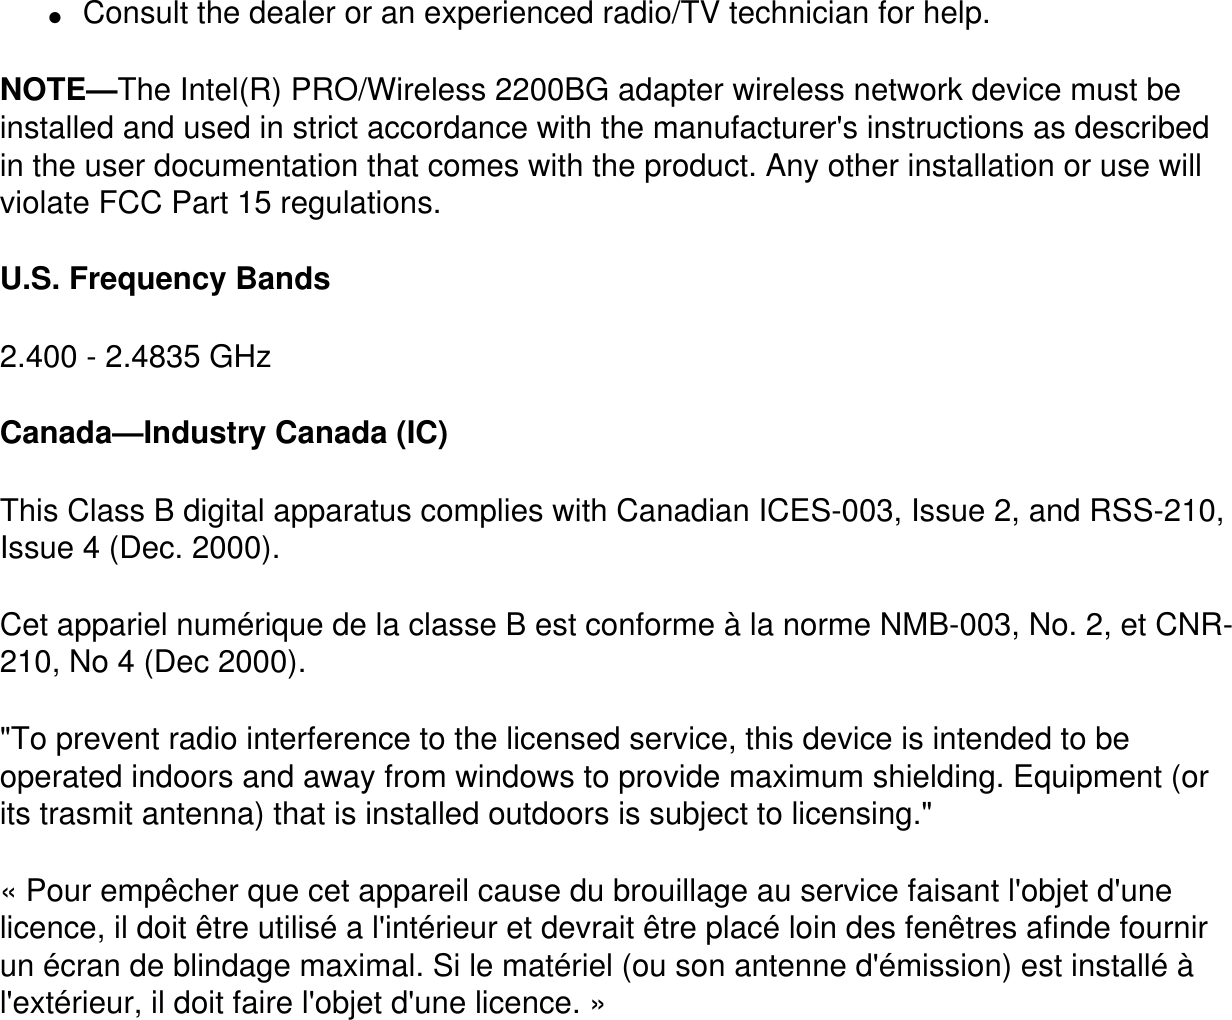 ●     Consult the dealer or an experienced radio/TV technician for help.NOTE—The Intel(R) PRO/Wireless 2200BG adapter wireless network device must be installed and used in strict accordance with the manufacturer&apos;s instructions as described in the user documentation that comes with the product. Any other installation or use will violate FCC Part 15 regulations.U.S. Frequency Bands2.400 - 2.4835 GHz Canada—Industry Canada (IC)This Class B digital apparatus complies with Canadian ICES-003, Issue 2, and RSS-210, Issue 4 (Dec. 2000). Cet appariel numérique de la classe B est conforme à la norme NMB-003, No. 2, et CNR-210, No 4 (Dec 2000).&quot;To prevent radio interference to the licensed service, this device is intended to be operated indoors and away from windows to provide maximum shielding. Equipment (or its trasmit antenna) that is installed outdoors is subject to licensing.&quot; « Pour empêcher que cet appareil cause du brouillage au service faisant l&apos;objet d&apos;une licence, il doit être utilisé a l&apos;intérieur et devrait être placé loin des fenêtres afinde fournir un écran de blindage maximal. Si le matériel (ou son antenne d&apos;émission) est installé à l&apos;extérieur, il doit faire l&apos;objet d&apos;une licence. » 